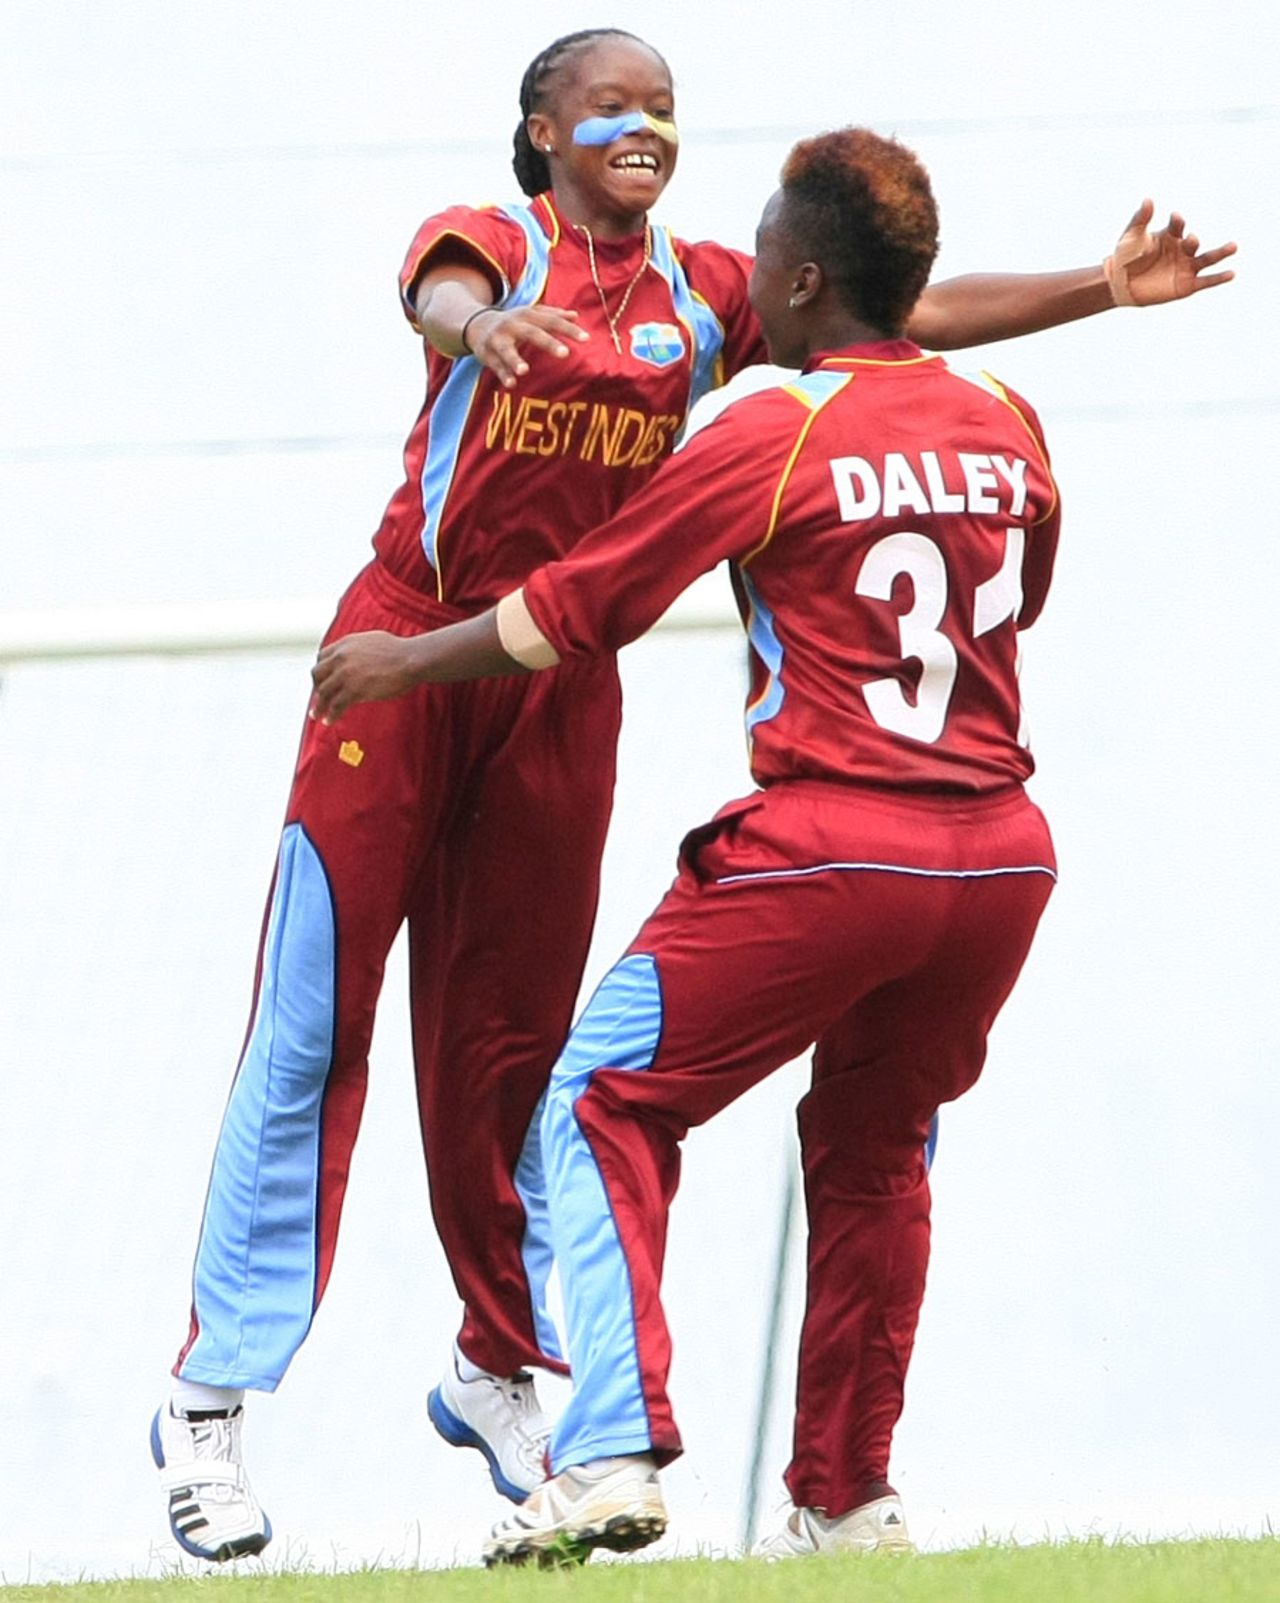 Shaquana Quintyne celebrates a wicket with Shanel Daley, West Indies v South Africa, 3rd Women's ODI, Roseau, January 12, 2013